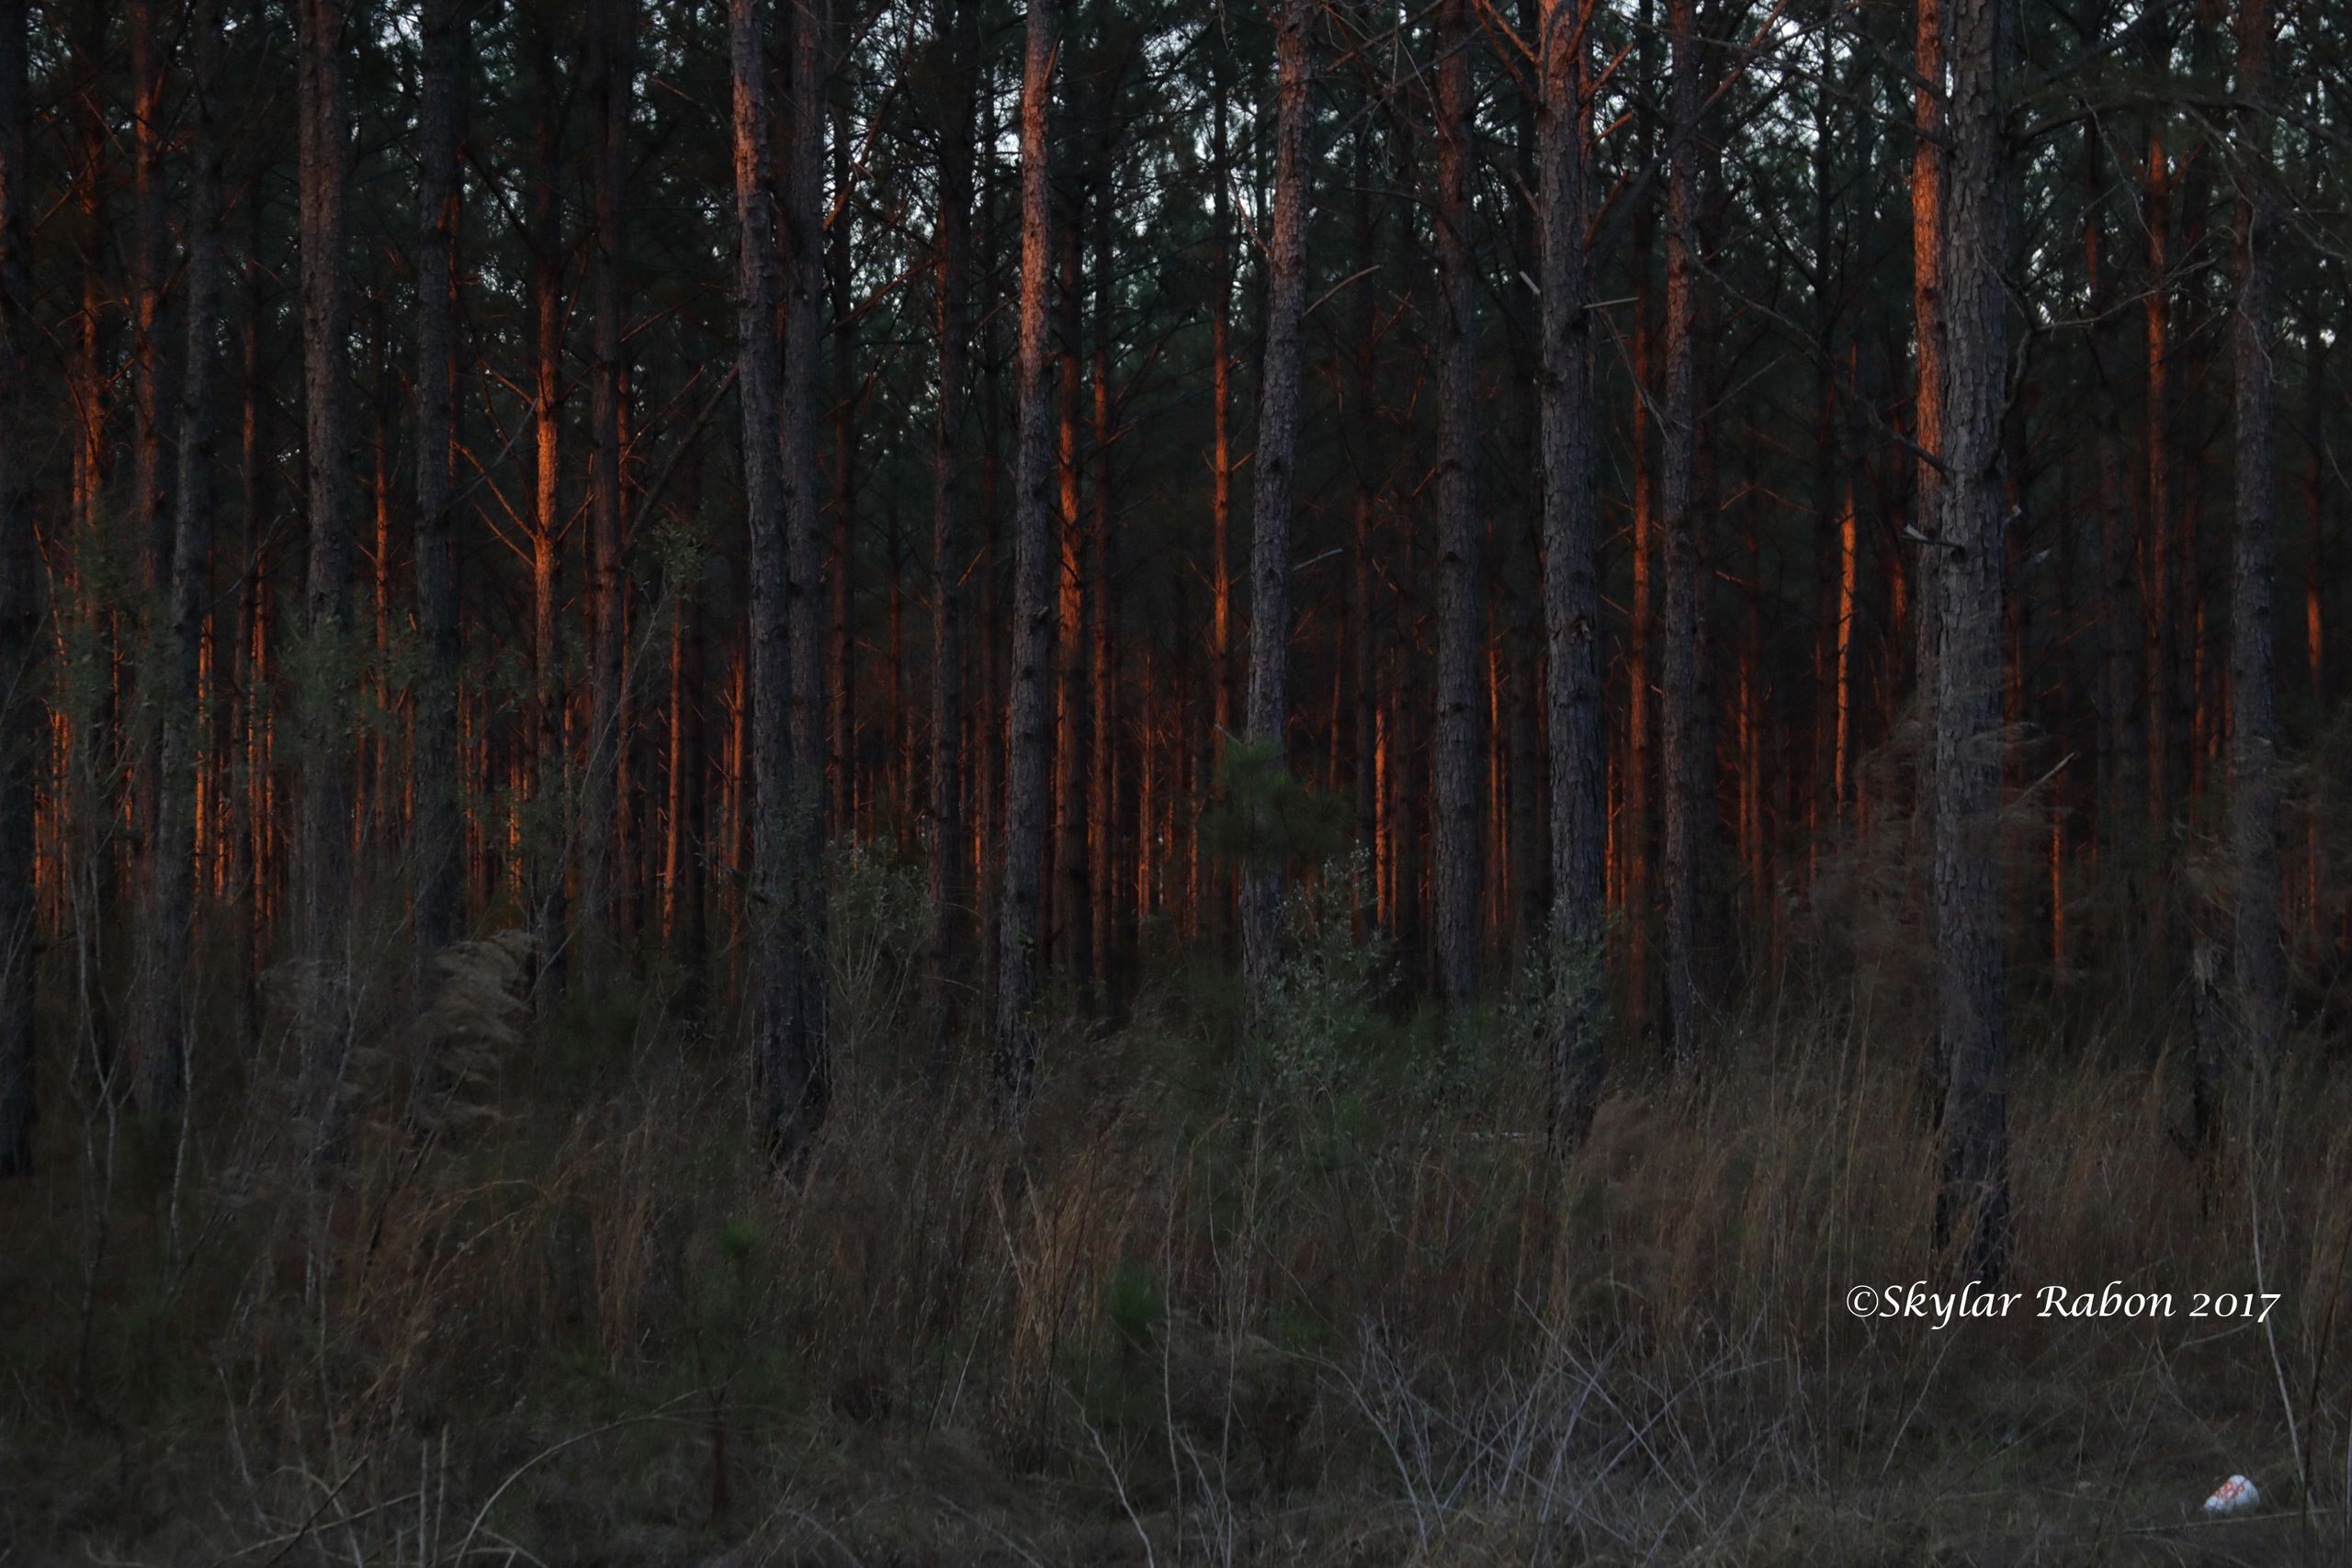 Woods on Fire Tower Road near Pansey, AL.  Site of the Pansey UFO incident.